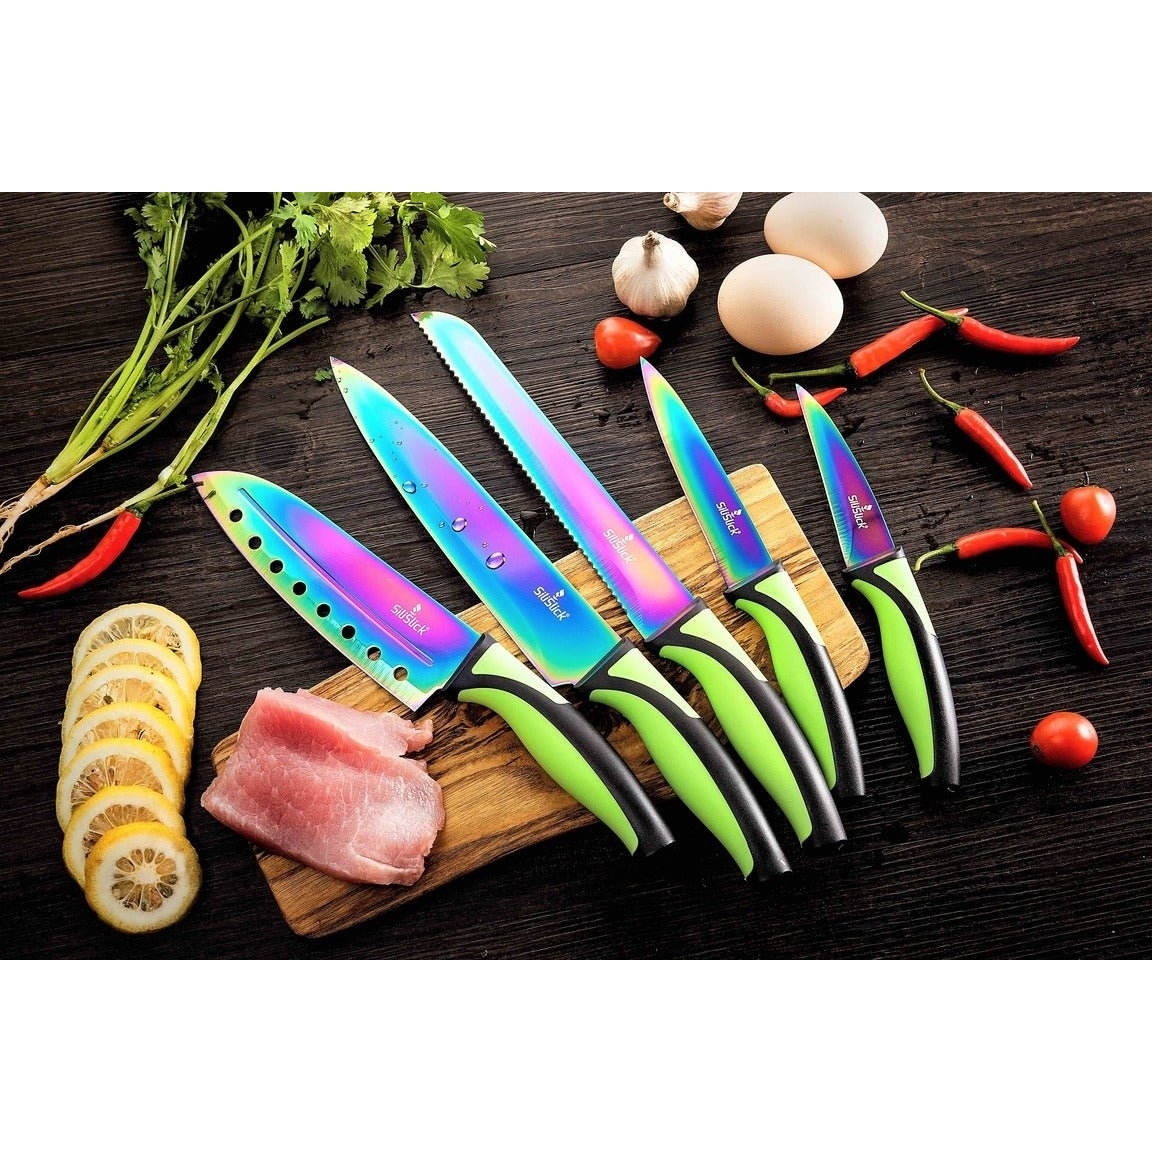 SiliSlick Stainless Steel Green Handle Knife Set - Titanium Coated Stainless Steel Kitchen Utility Knife, Santoku, Bread, Chef, & Paring